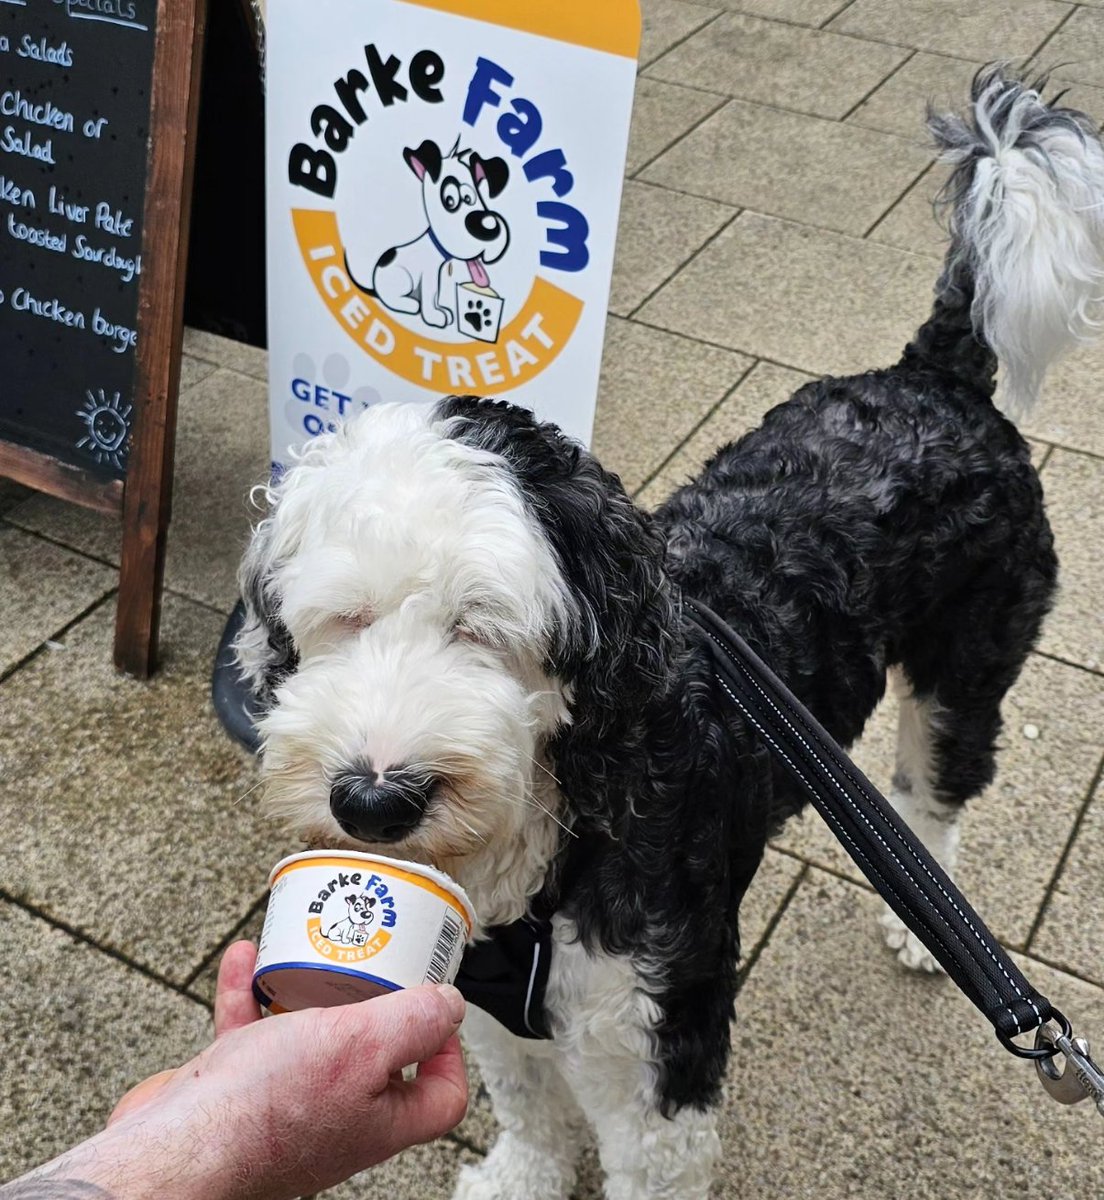 Sorry Uncle Mick, Grandma, Grandad Harry, and all her other buddies, Luna has a new friend that you're having to share her with! 

Barke Farm iced treats are now being served at Beansies. 

#woof
#ziggylovesthemtoo
#shopdog
#hellodoggie
#dogfriendly